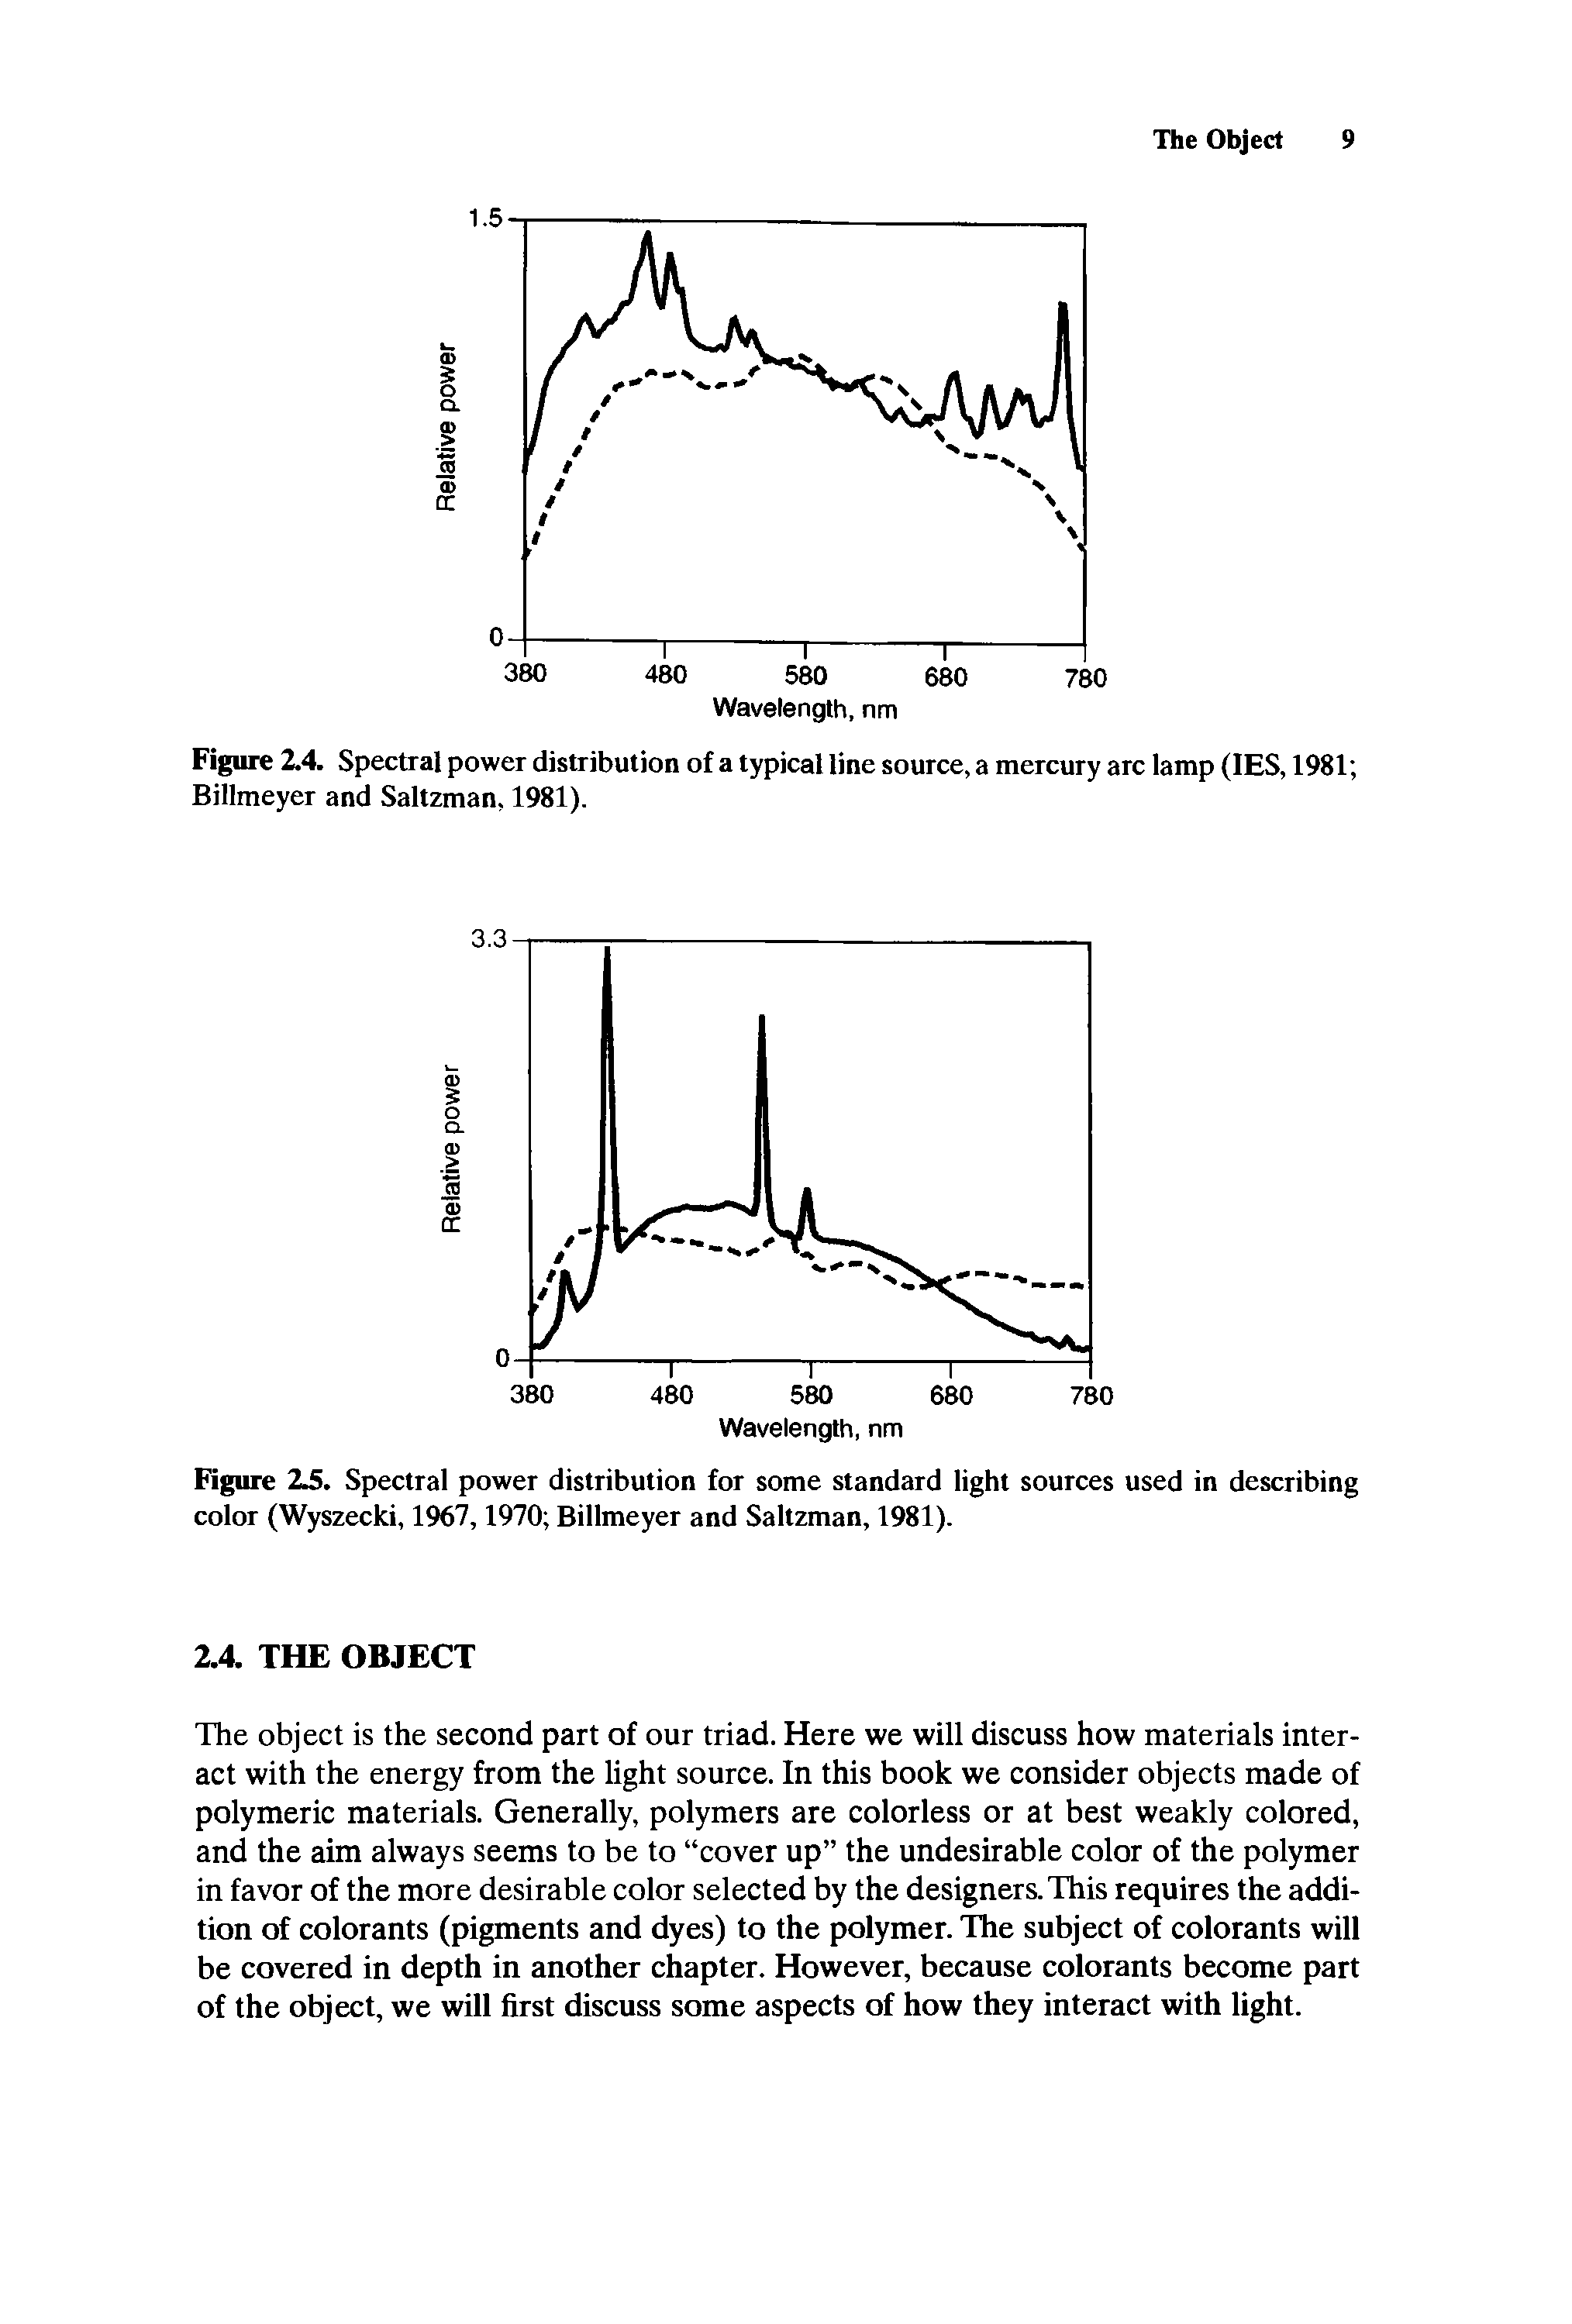 Figure 2.4. Spectral power distribution of a typical line source, a mercury arc lamp (IES, 1981 Billmeyer and Saltzman, 1981).